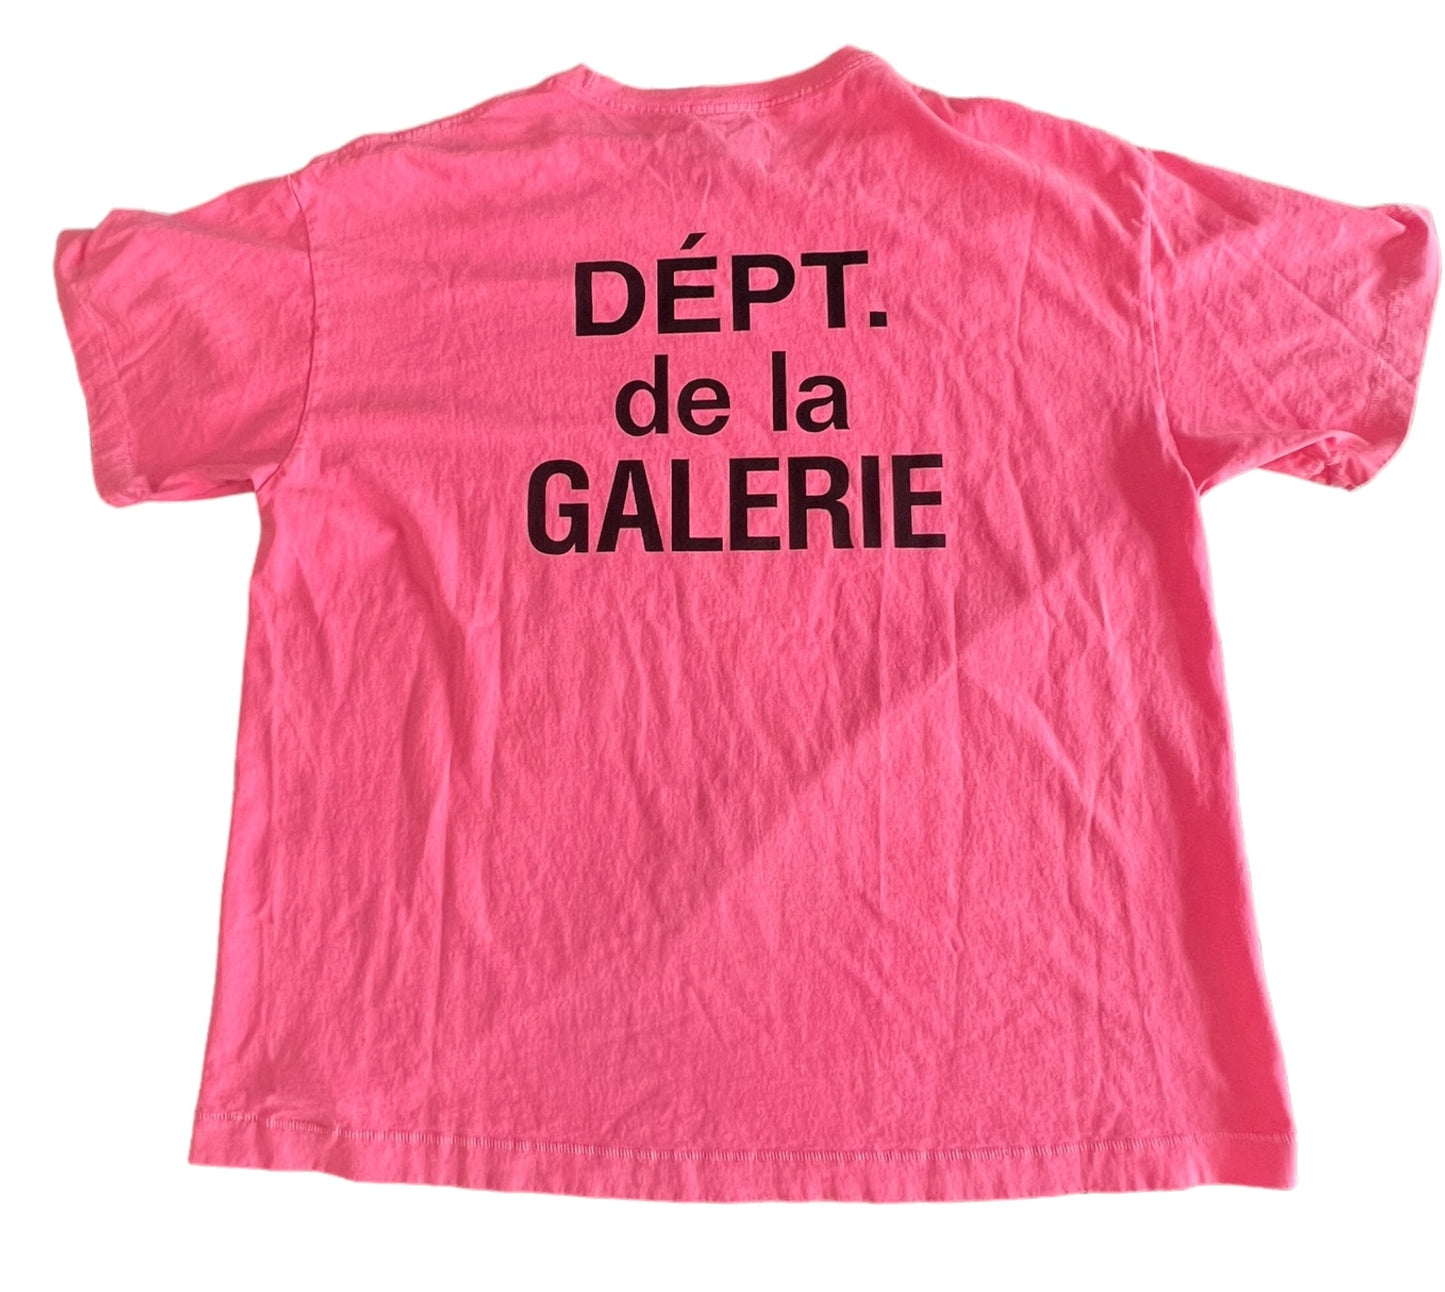 Gallery Dept French souvenir Tee Size L New